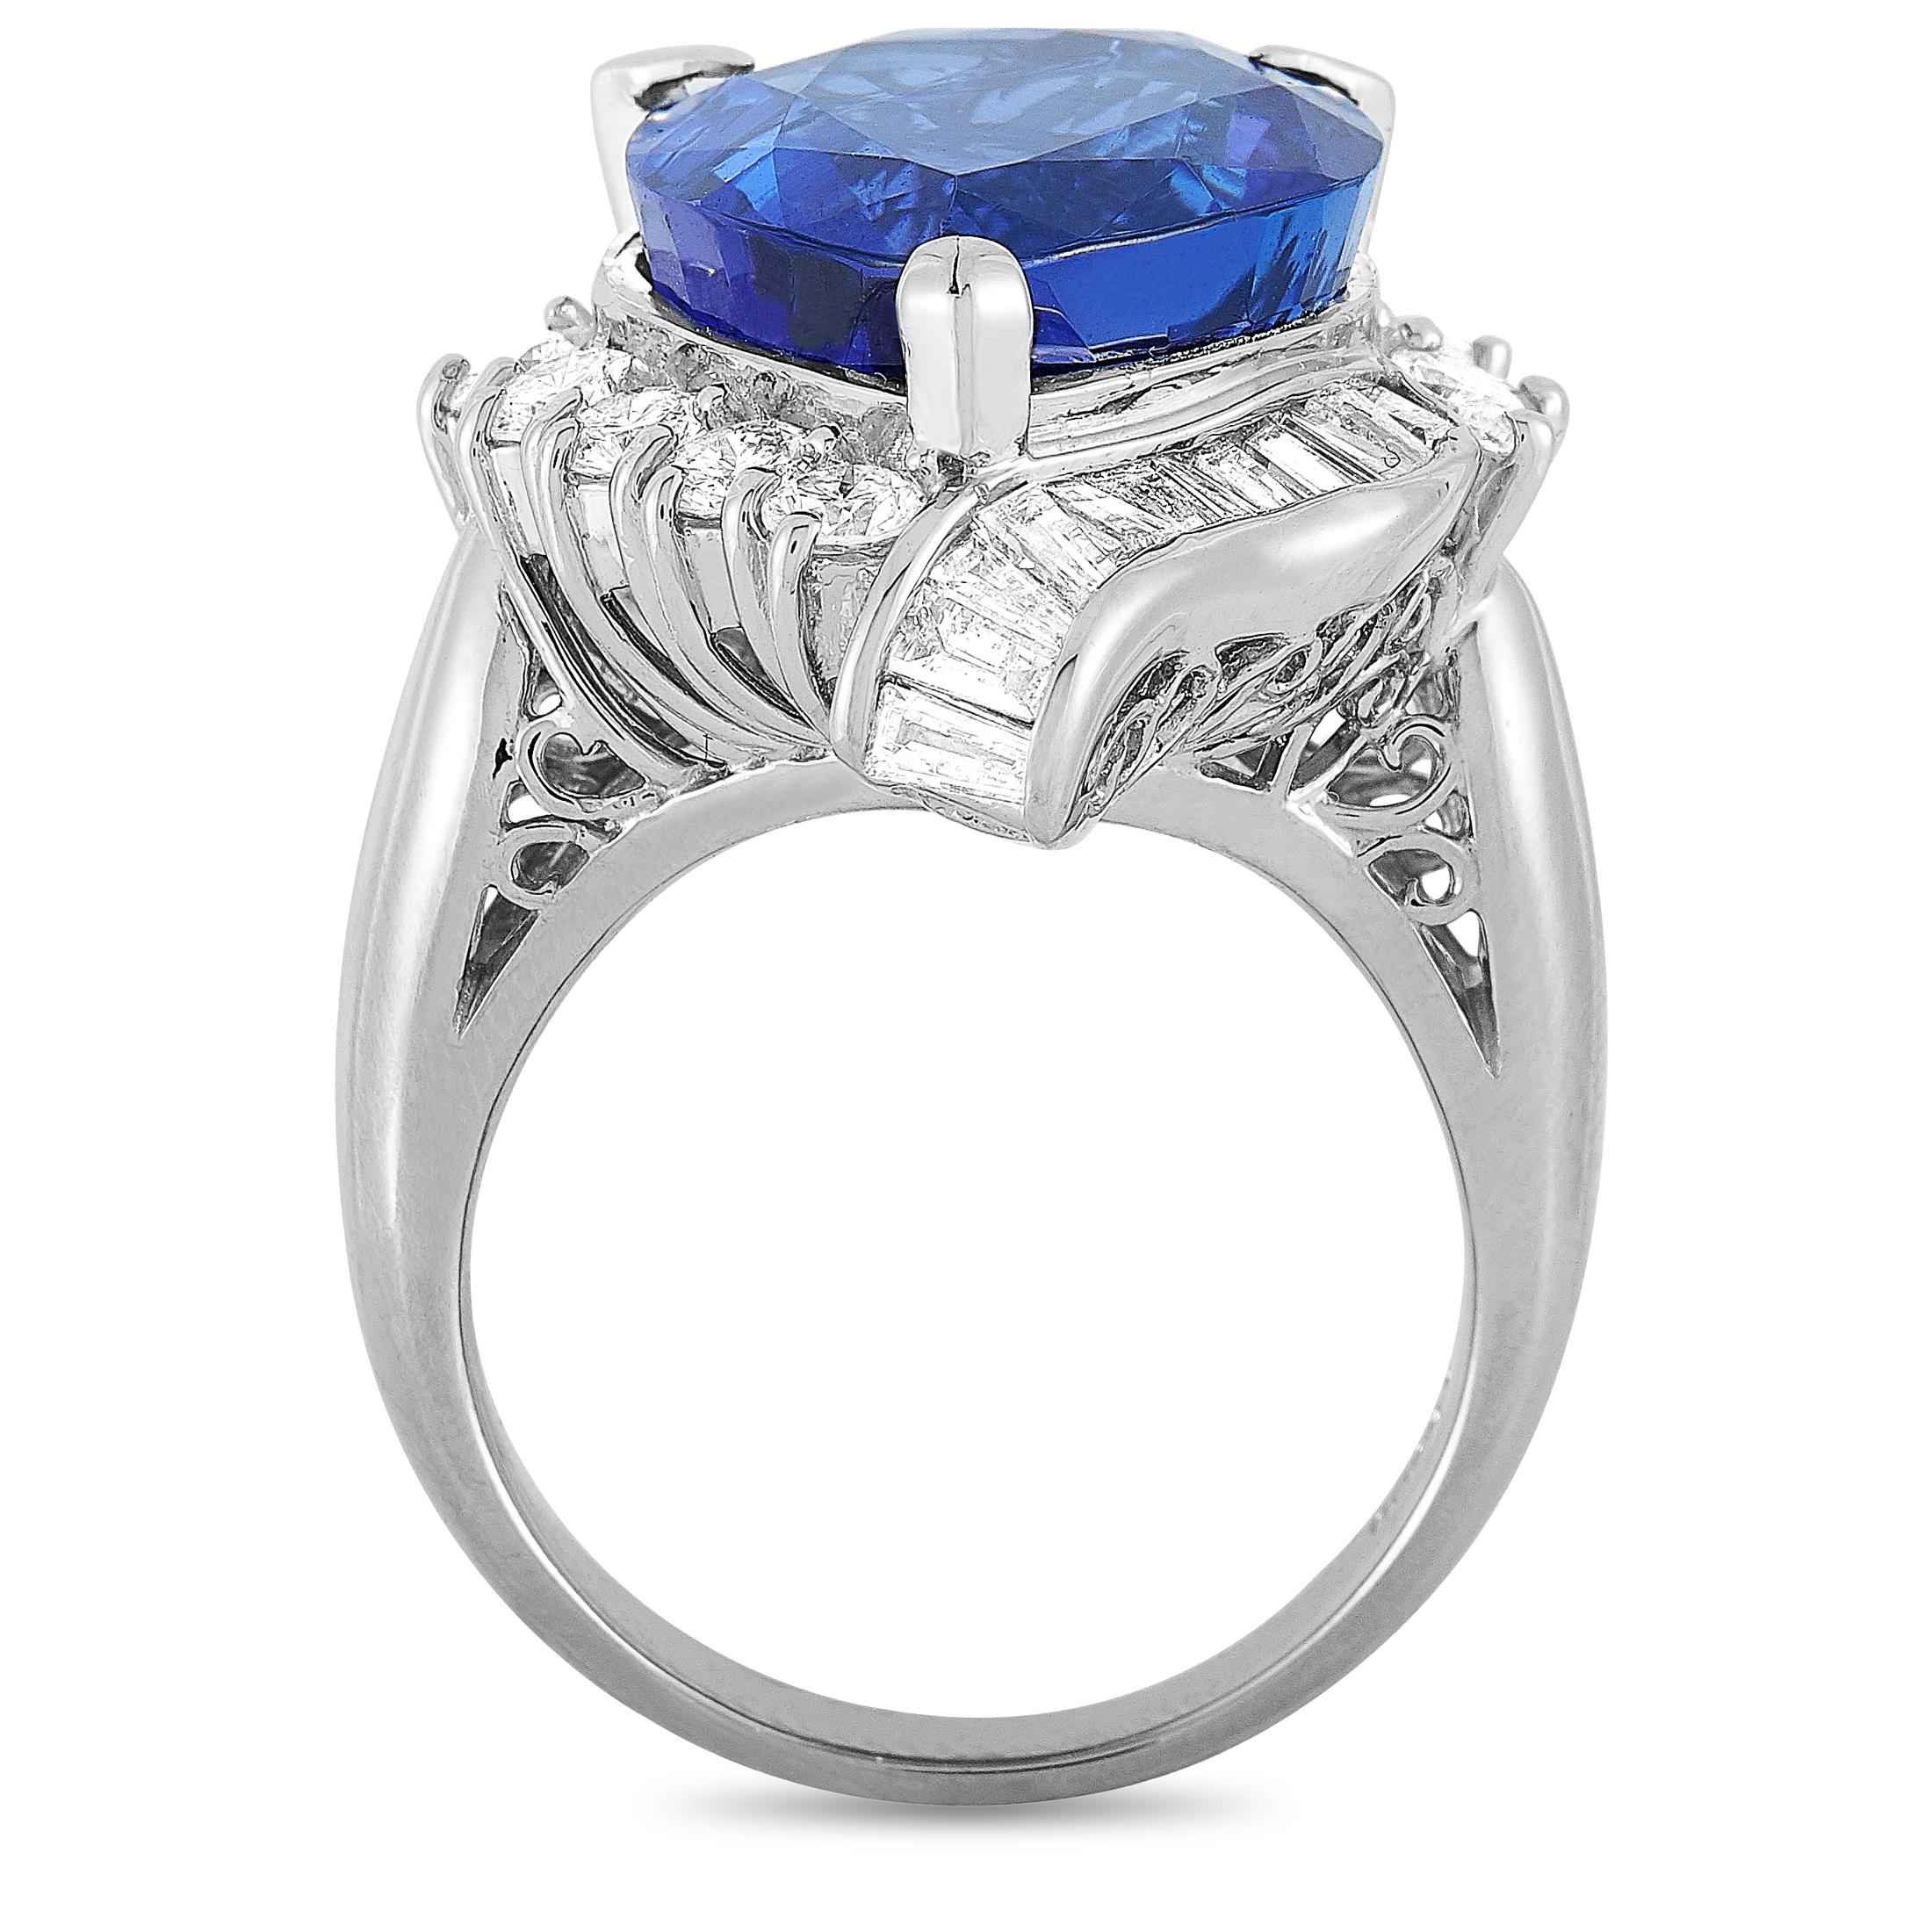 This LB Exclusive ring is made of platinum and embellished with a tanzanite that weighs 15.81 carats and a total of 2.10 carats of diamonds. The ring weighs 23.9 grams and boasts band thickness of 3 mm and top height of 13 mm, while top dimensions